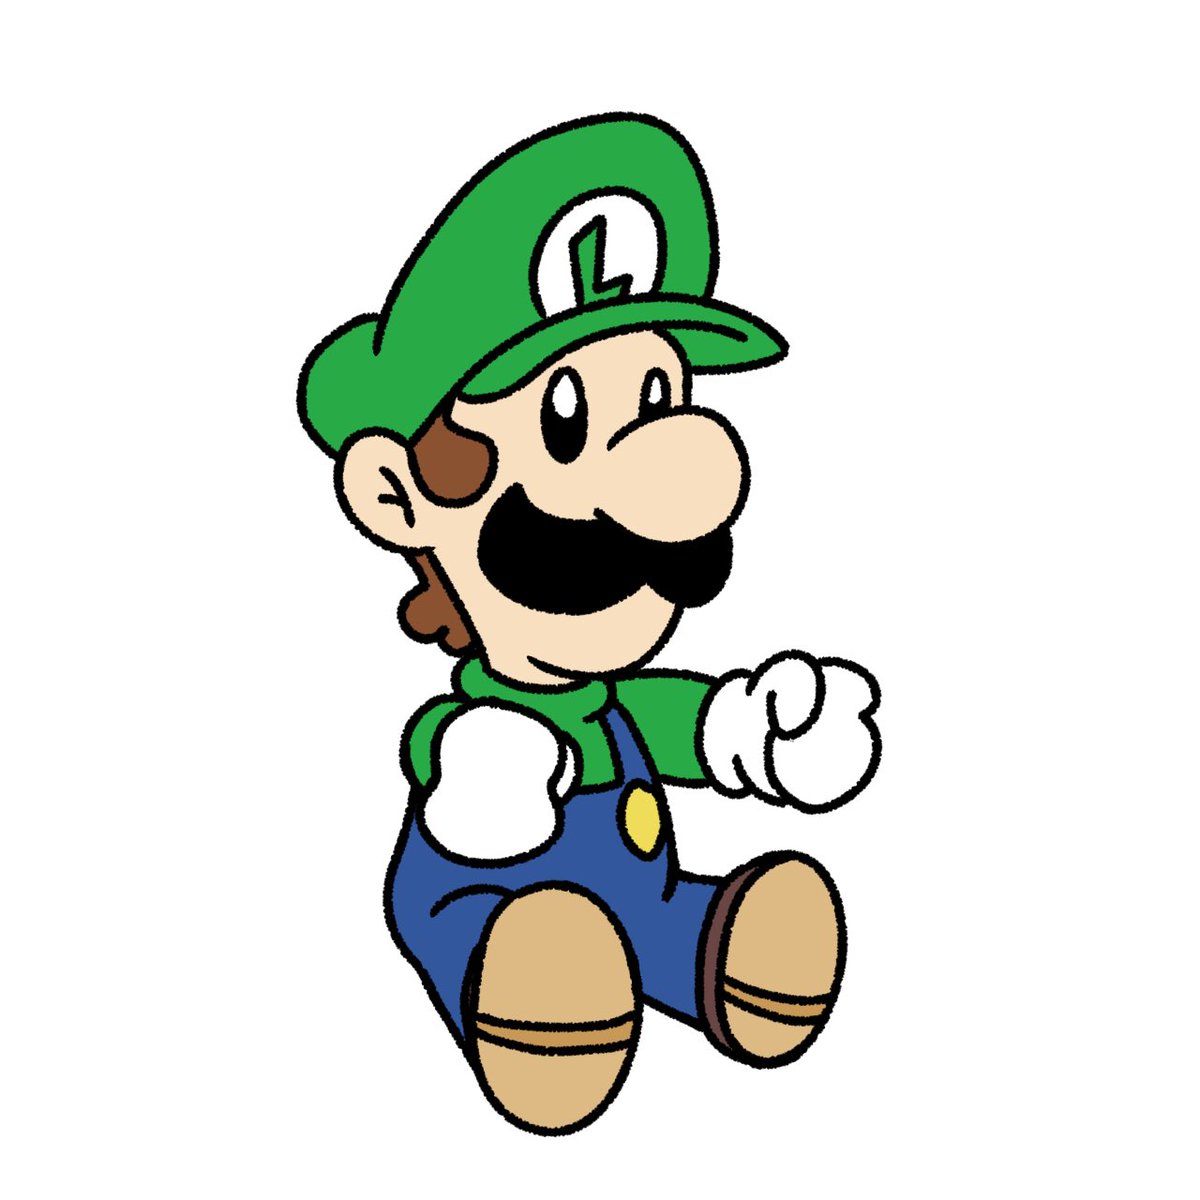 There was a Luigi trend that I missed a while back….anyway here’s a silly little weegee for your timeline